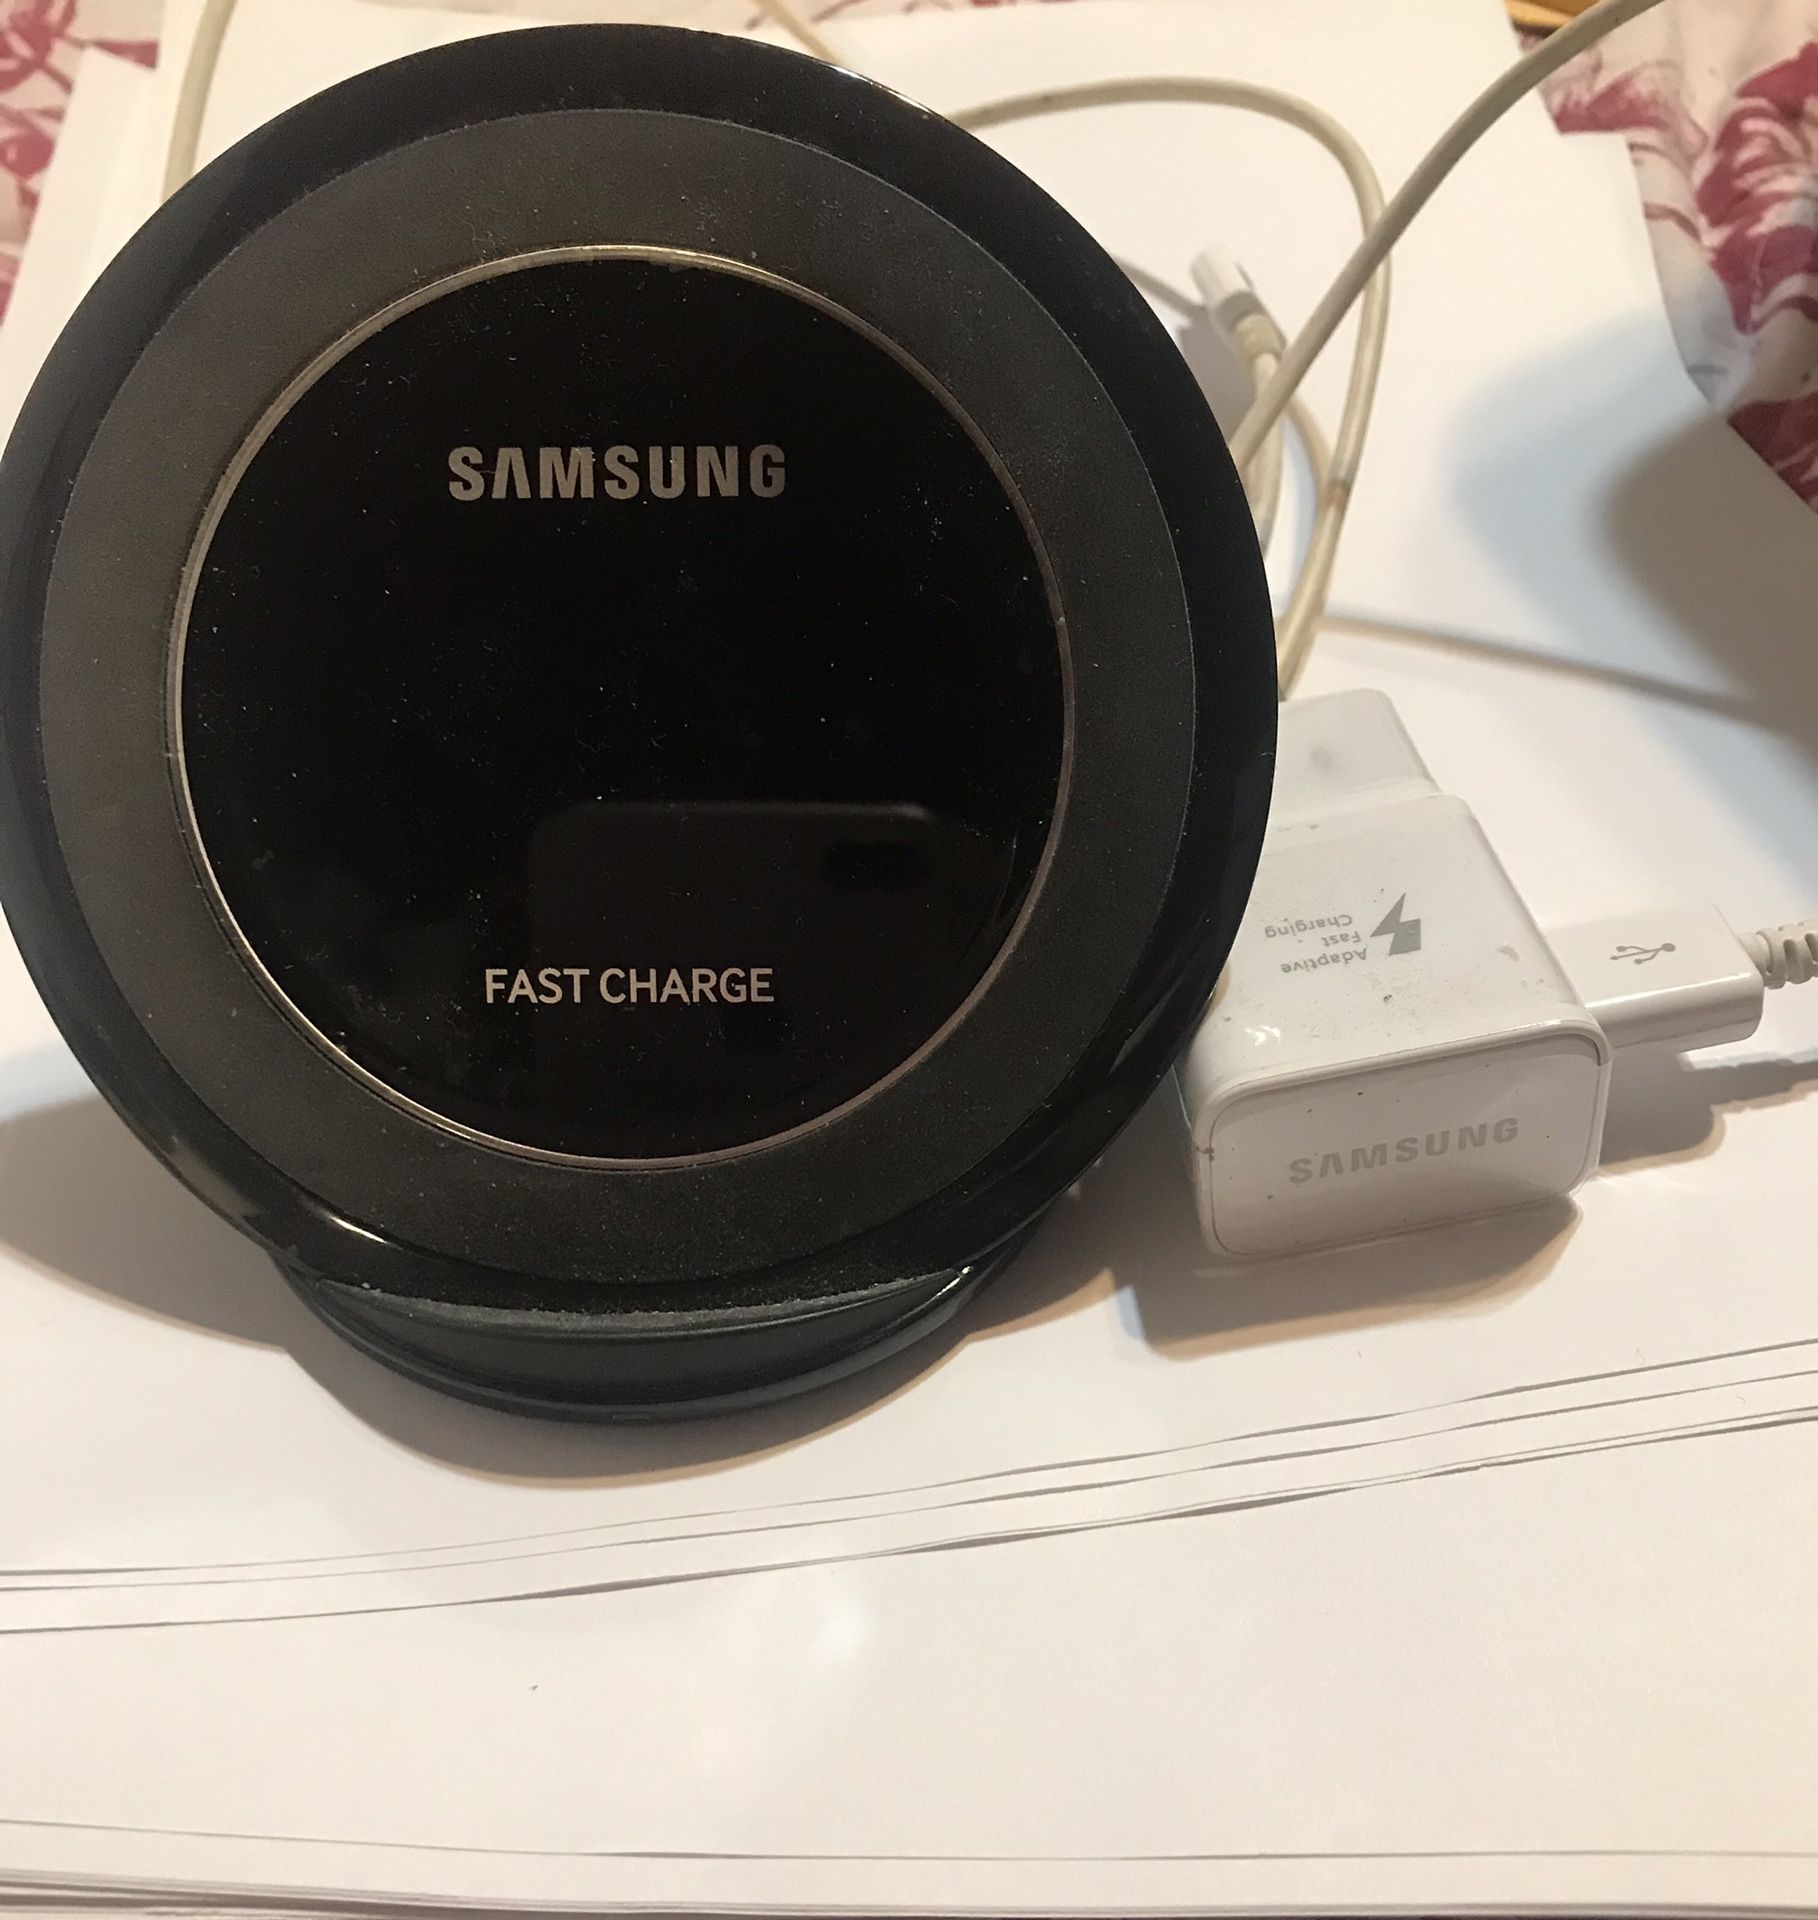 Samsung fast charger for Galaxy Phone